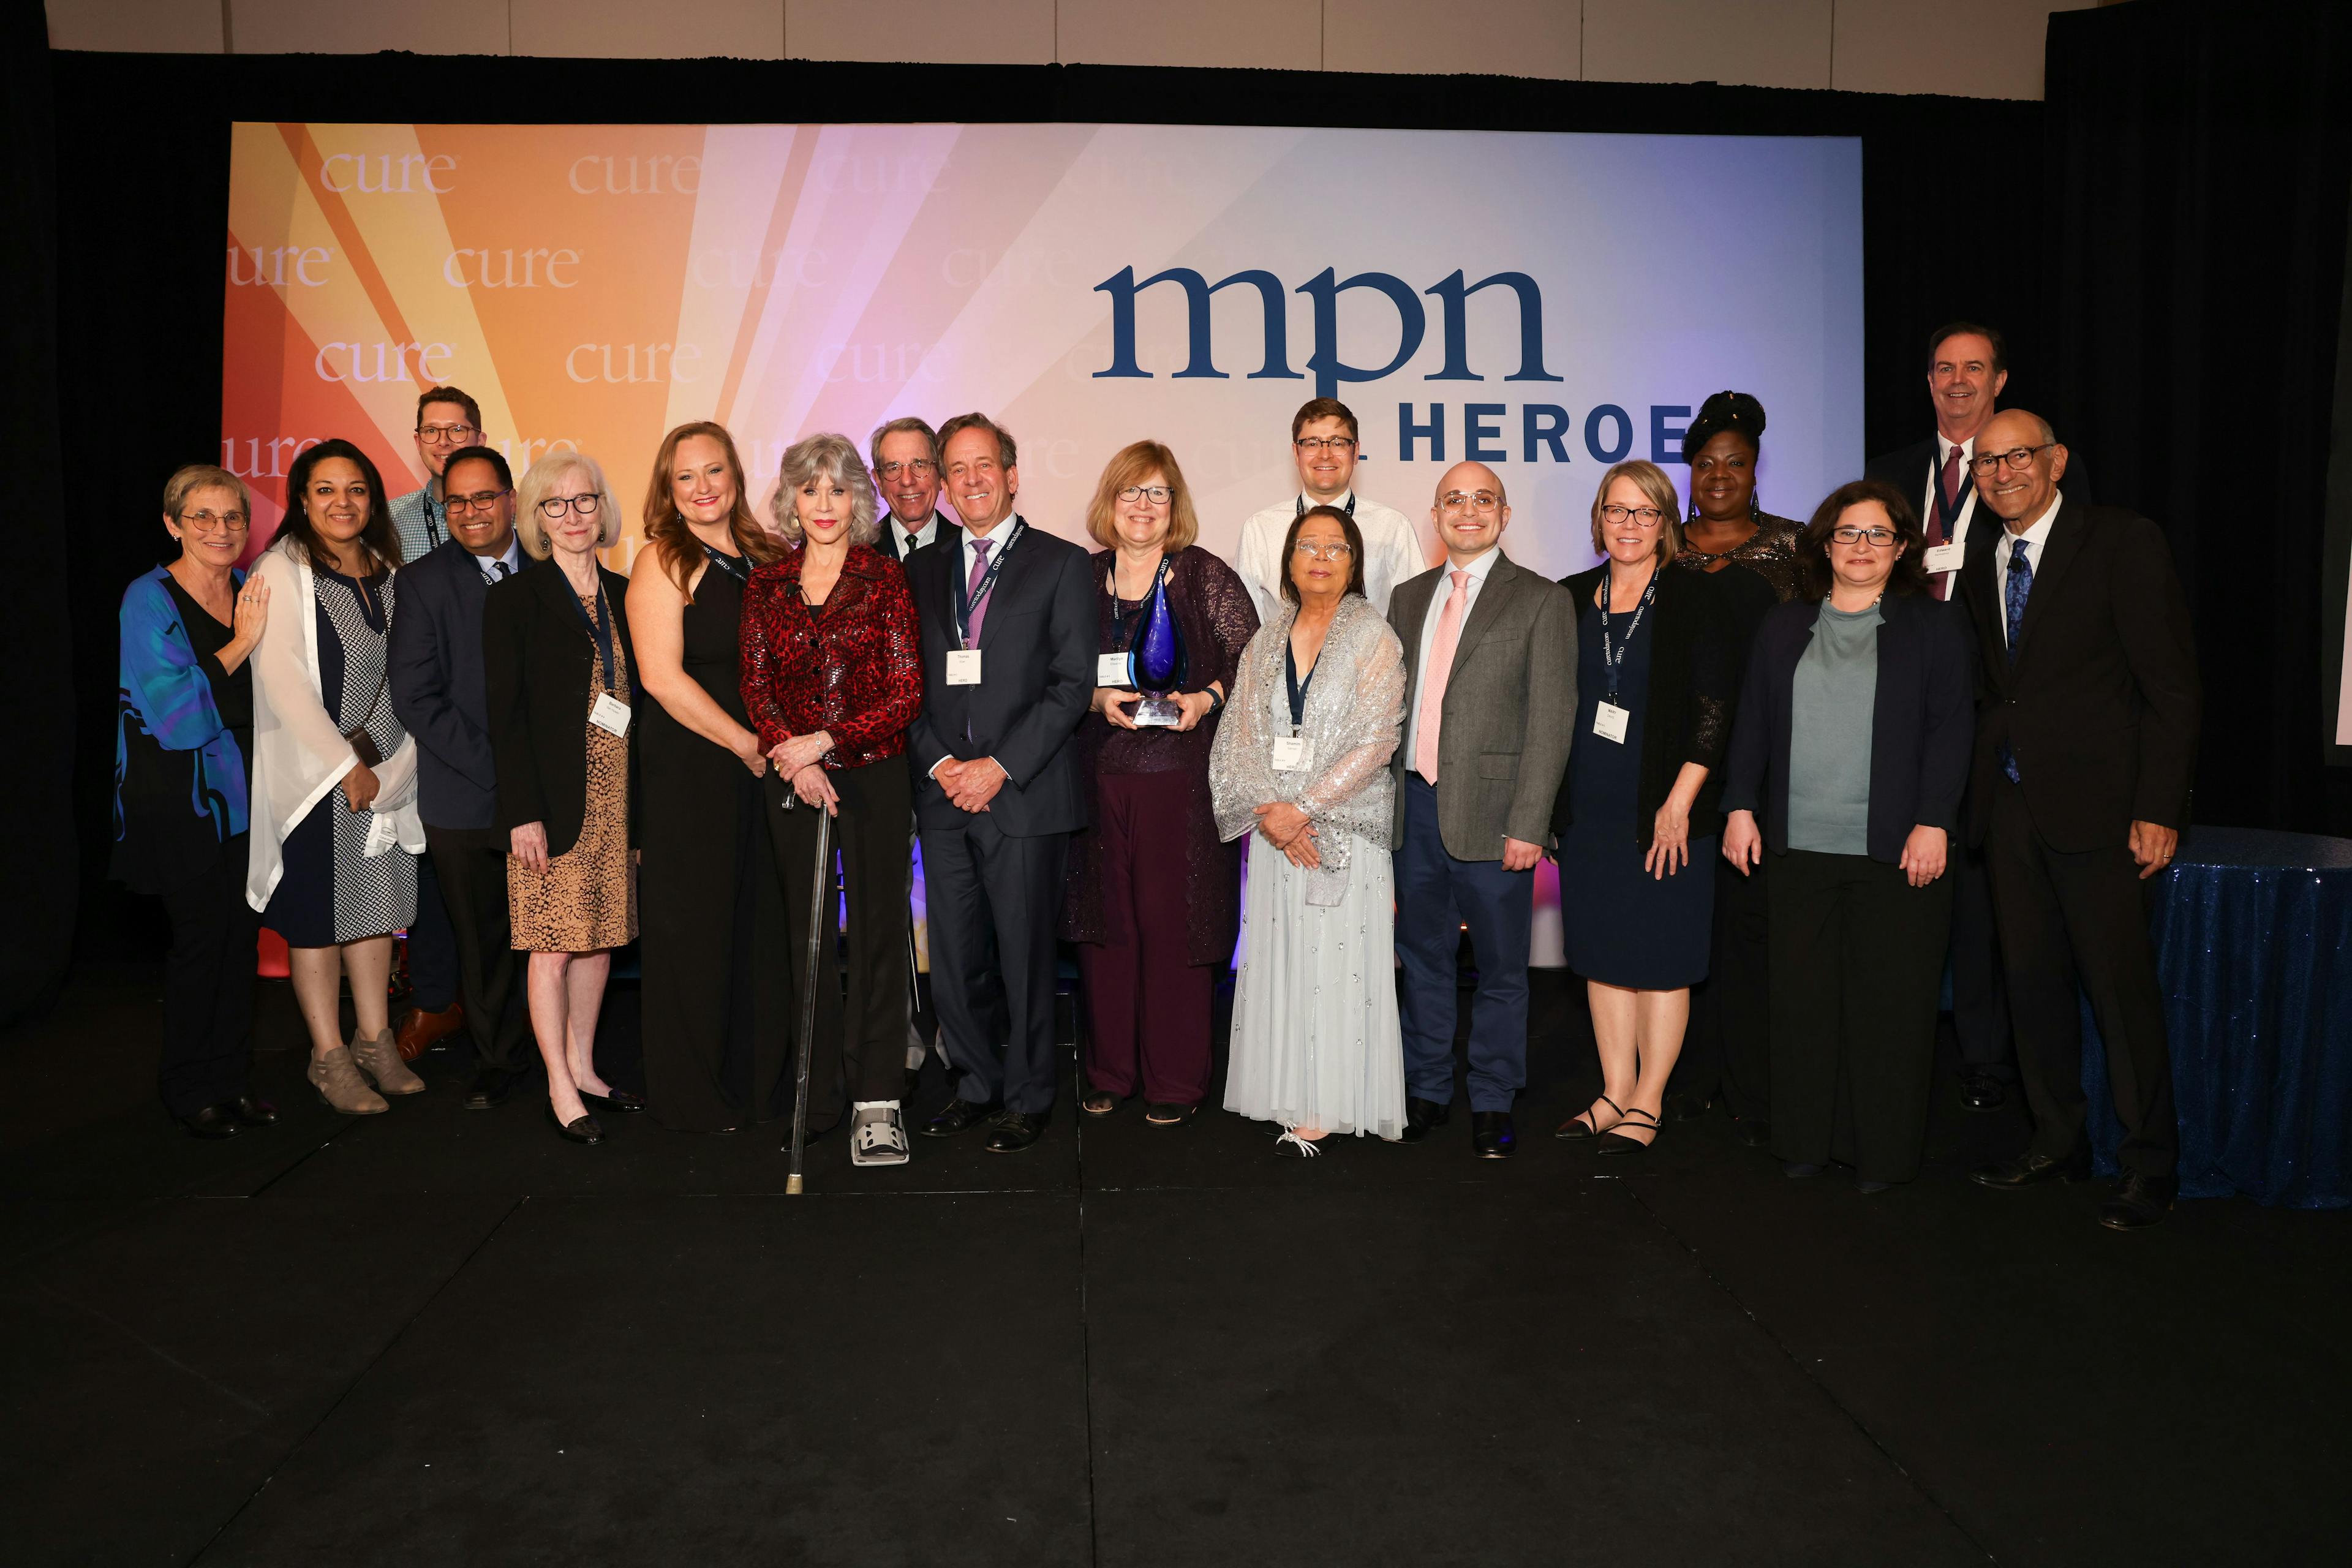 MPN Heroes, their nominators, Jane Fonda and Andrew and Esther Schorr at the 11th Annual MPN Heroes event